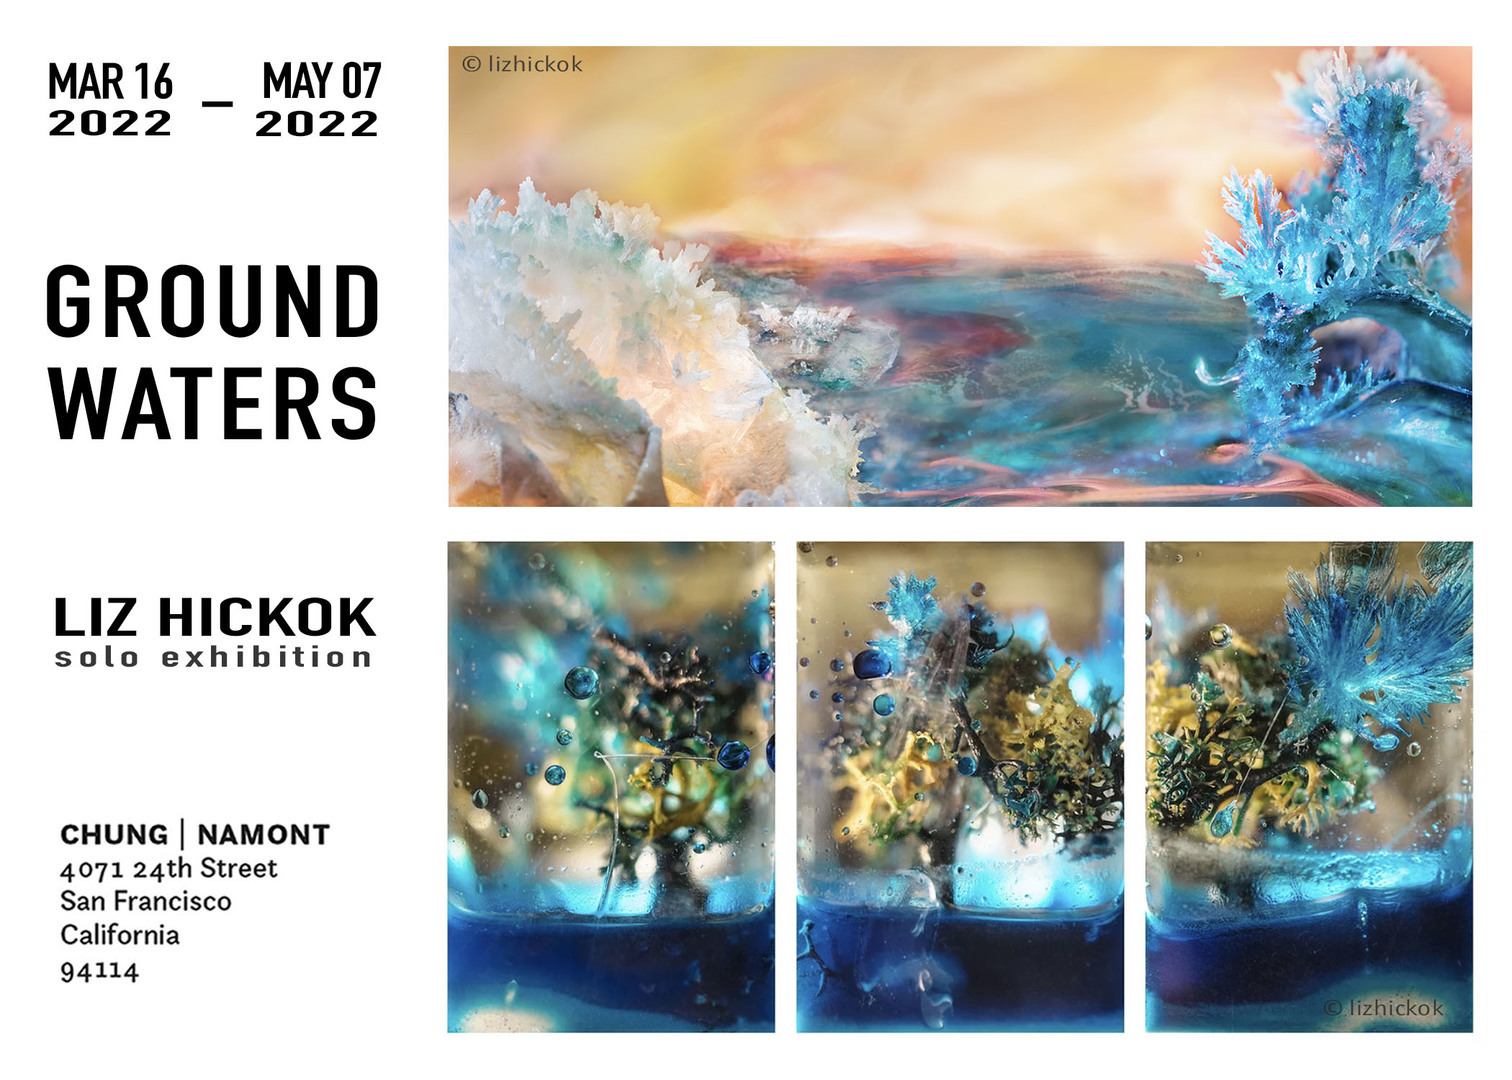 GROUND WATERS, artist Liz Hickok's solo exhibition at CHUNG | NAMONT art gallery in Noe Valley, San Francisco, California, United States